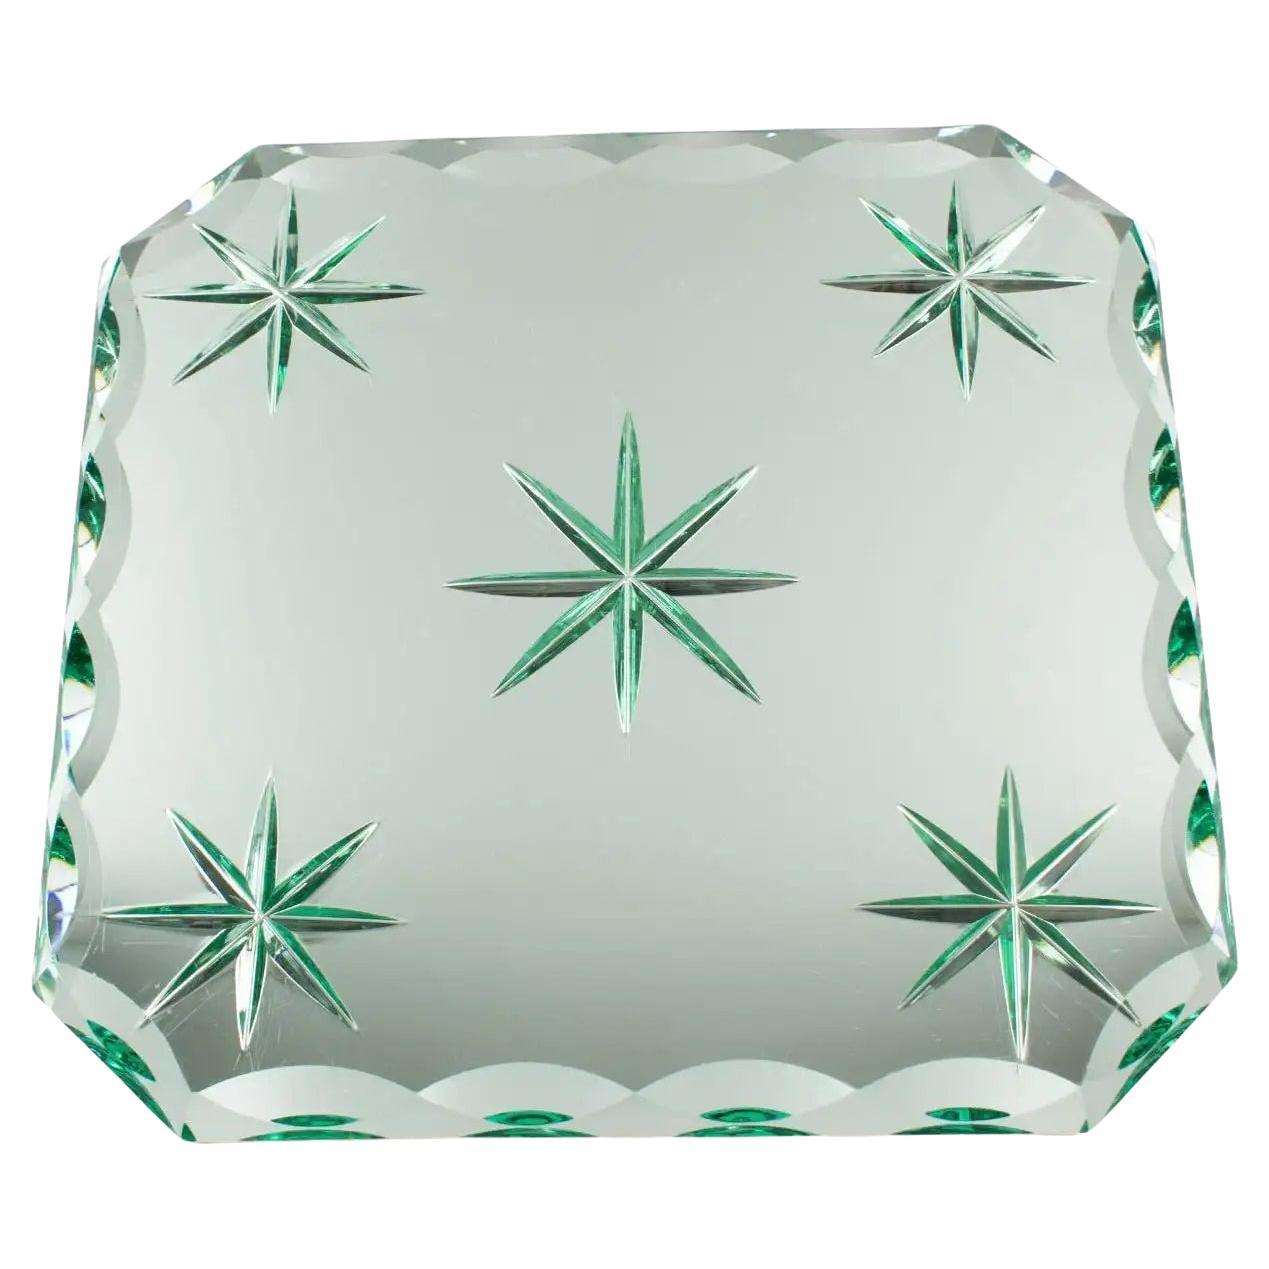 Jean Luce Art Deco Mirrored Glass Tray, Platter or Centerpiece, 1930s For Sale